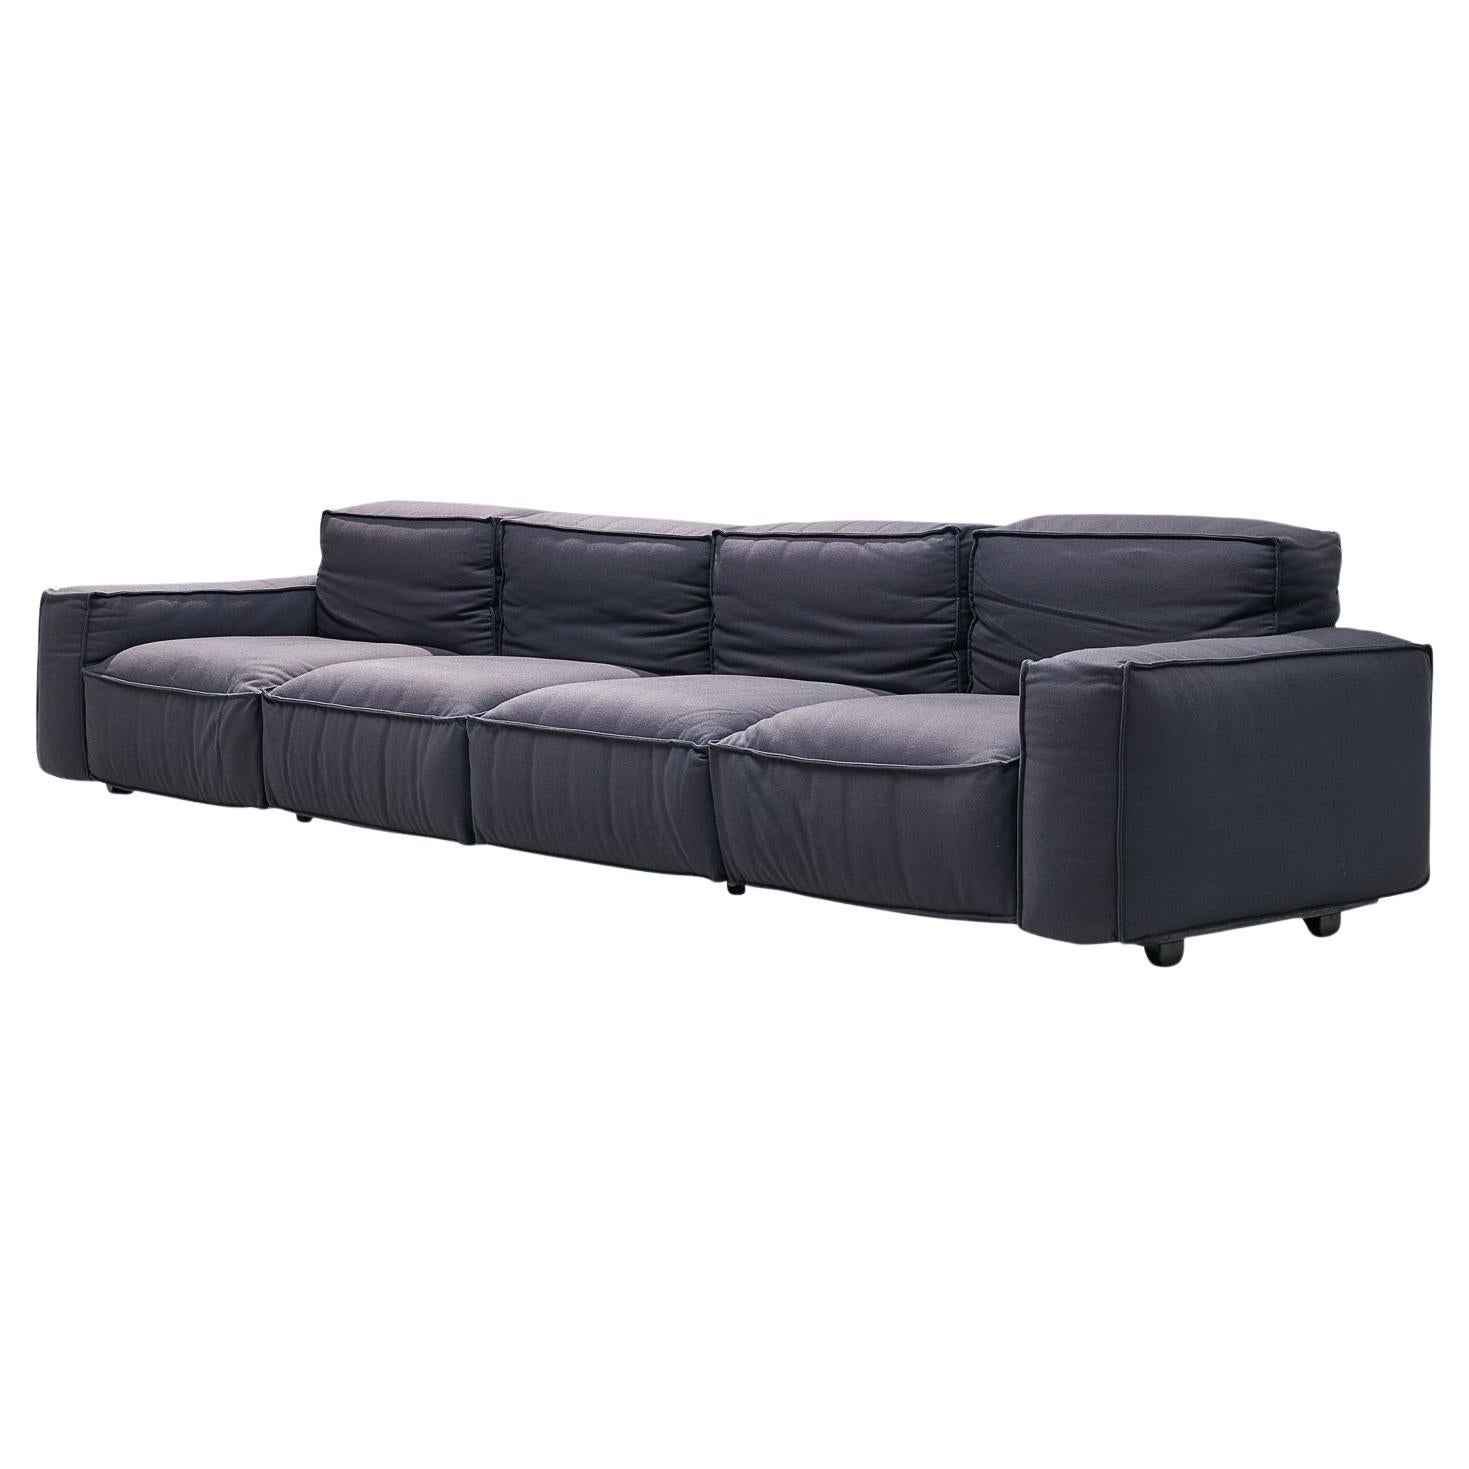 Mario Marenco for Arflex Four-Seater Sofa in Blue Woolen Upholstery  For Sale